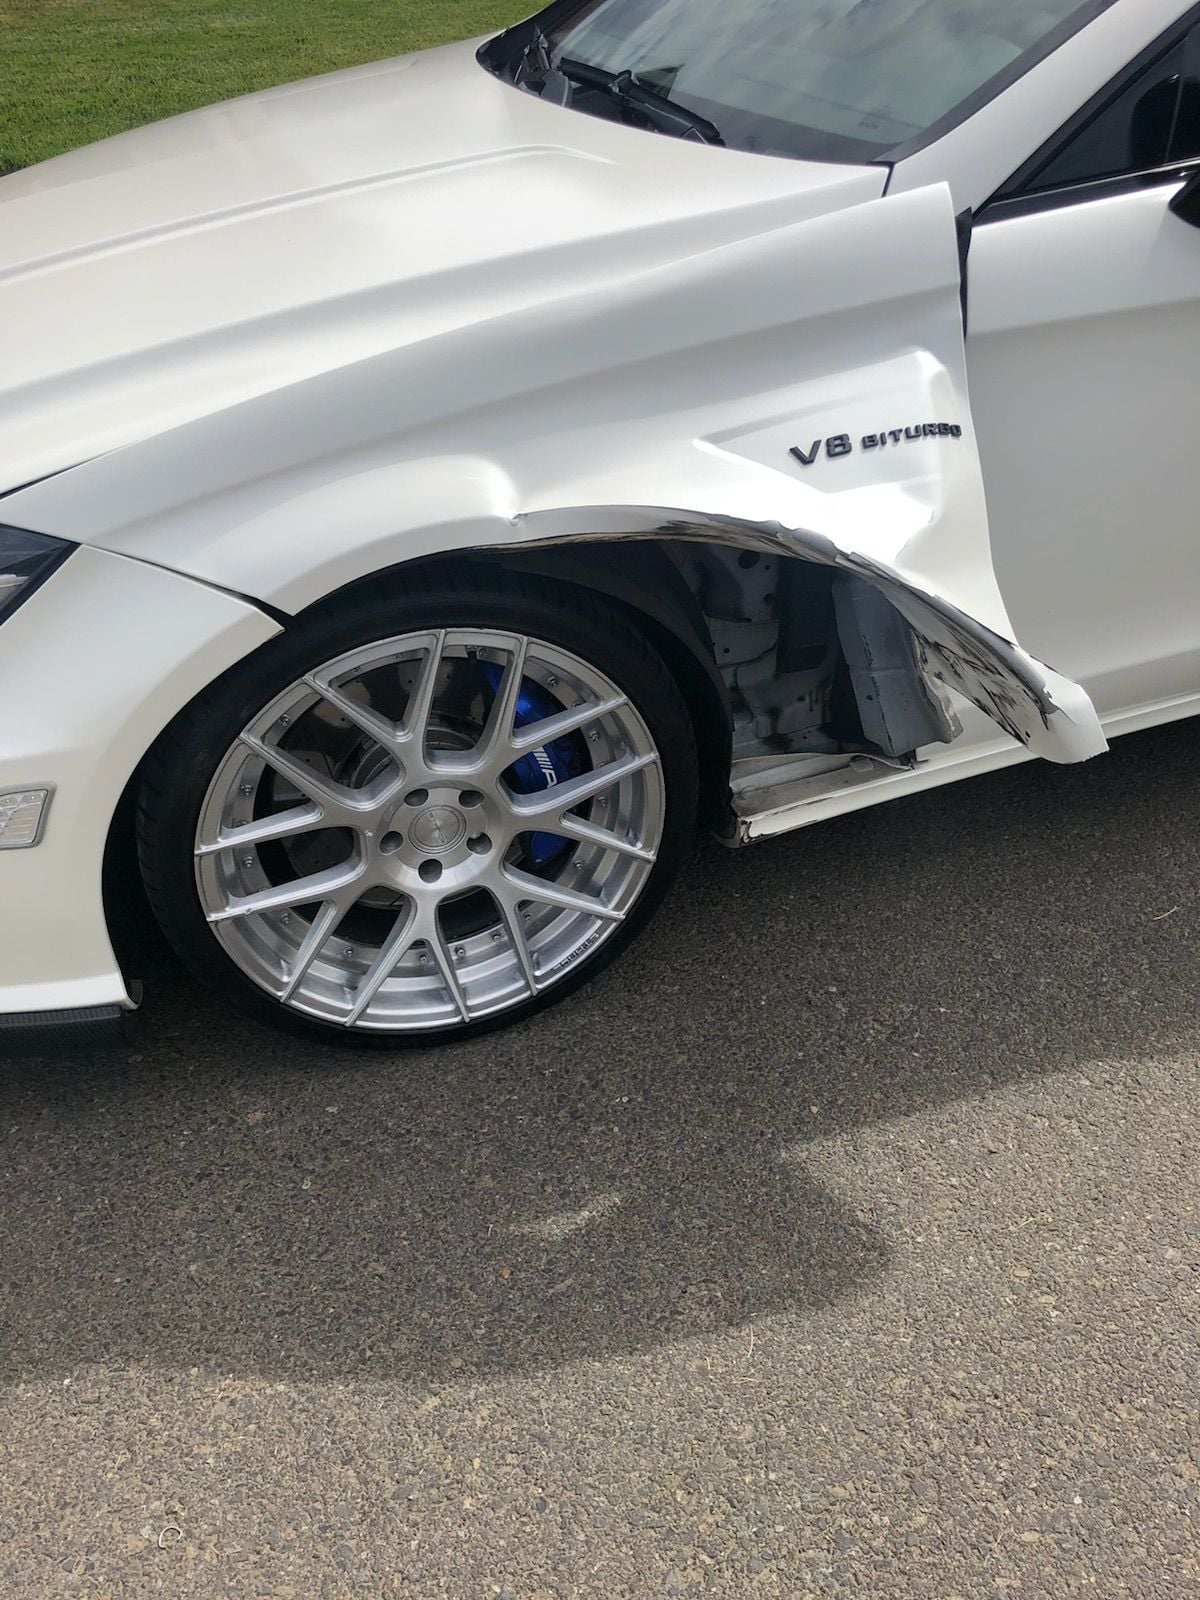 2012 Mercedes-Benz CLS63 AMG - 2012 mercedes cls63 damaged - Used - VIN wddlj7eb6ca040777 - 48,000 Miles - White - Vancouver, WA 98682, United States